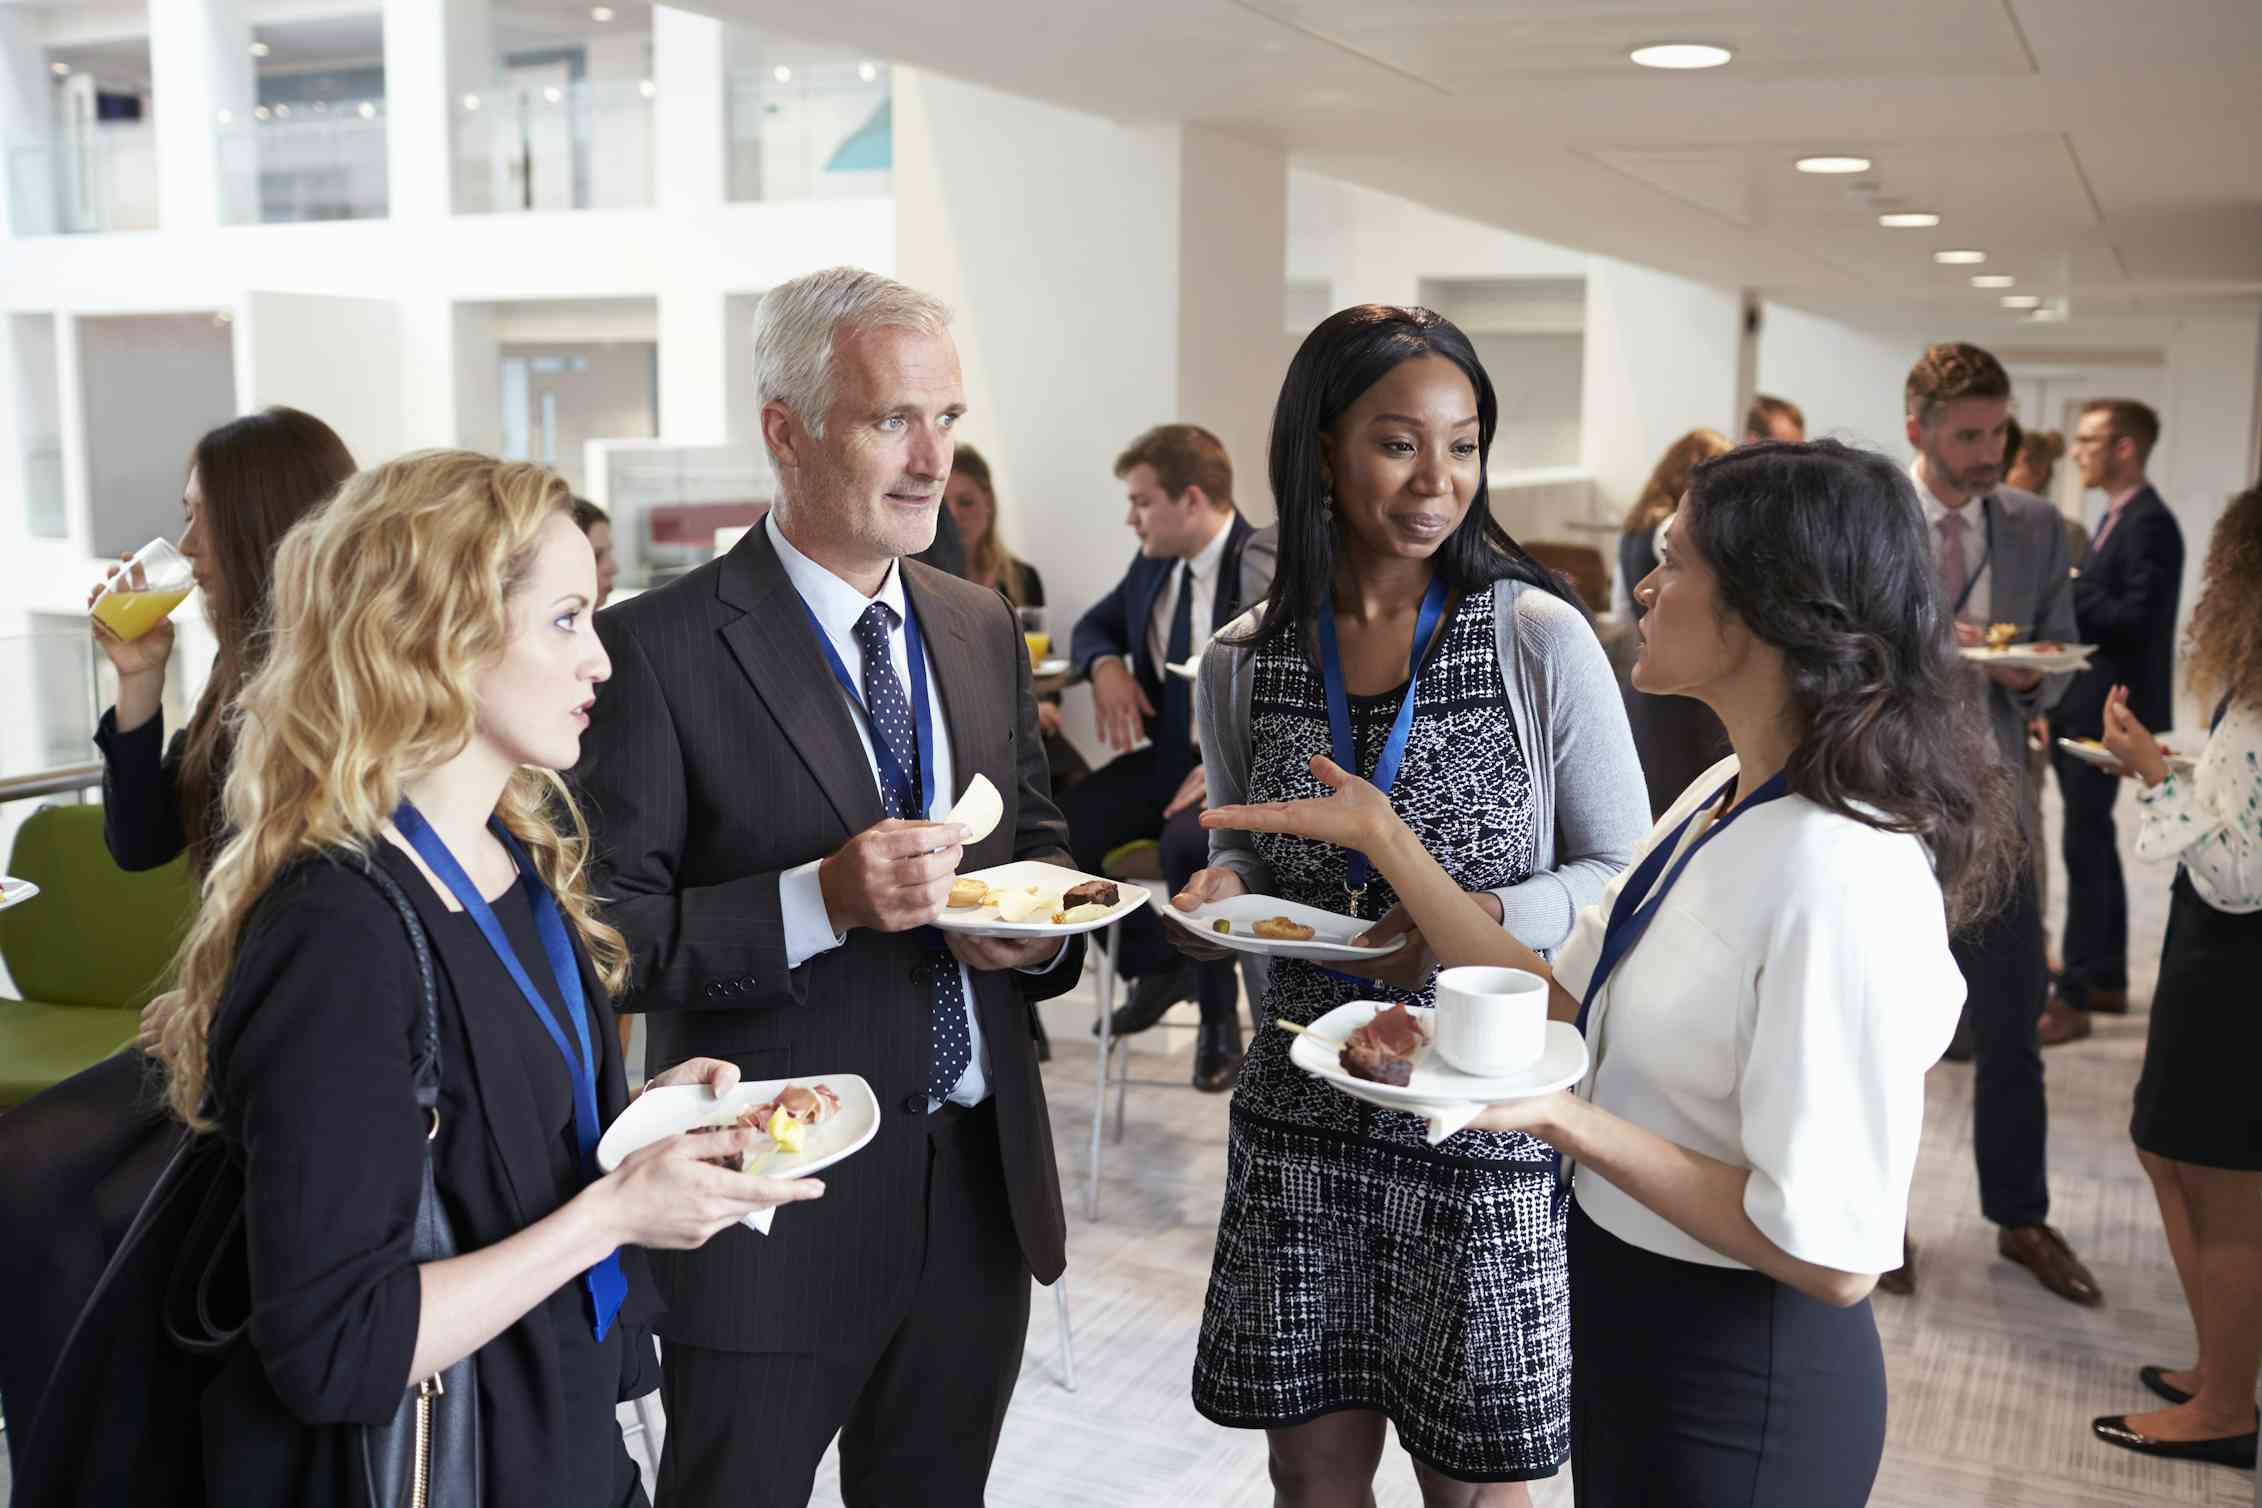  A group of people networking at a professional event, eating, drinking, and talking.